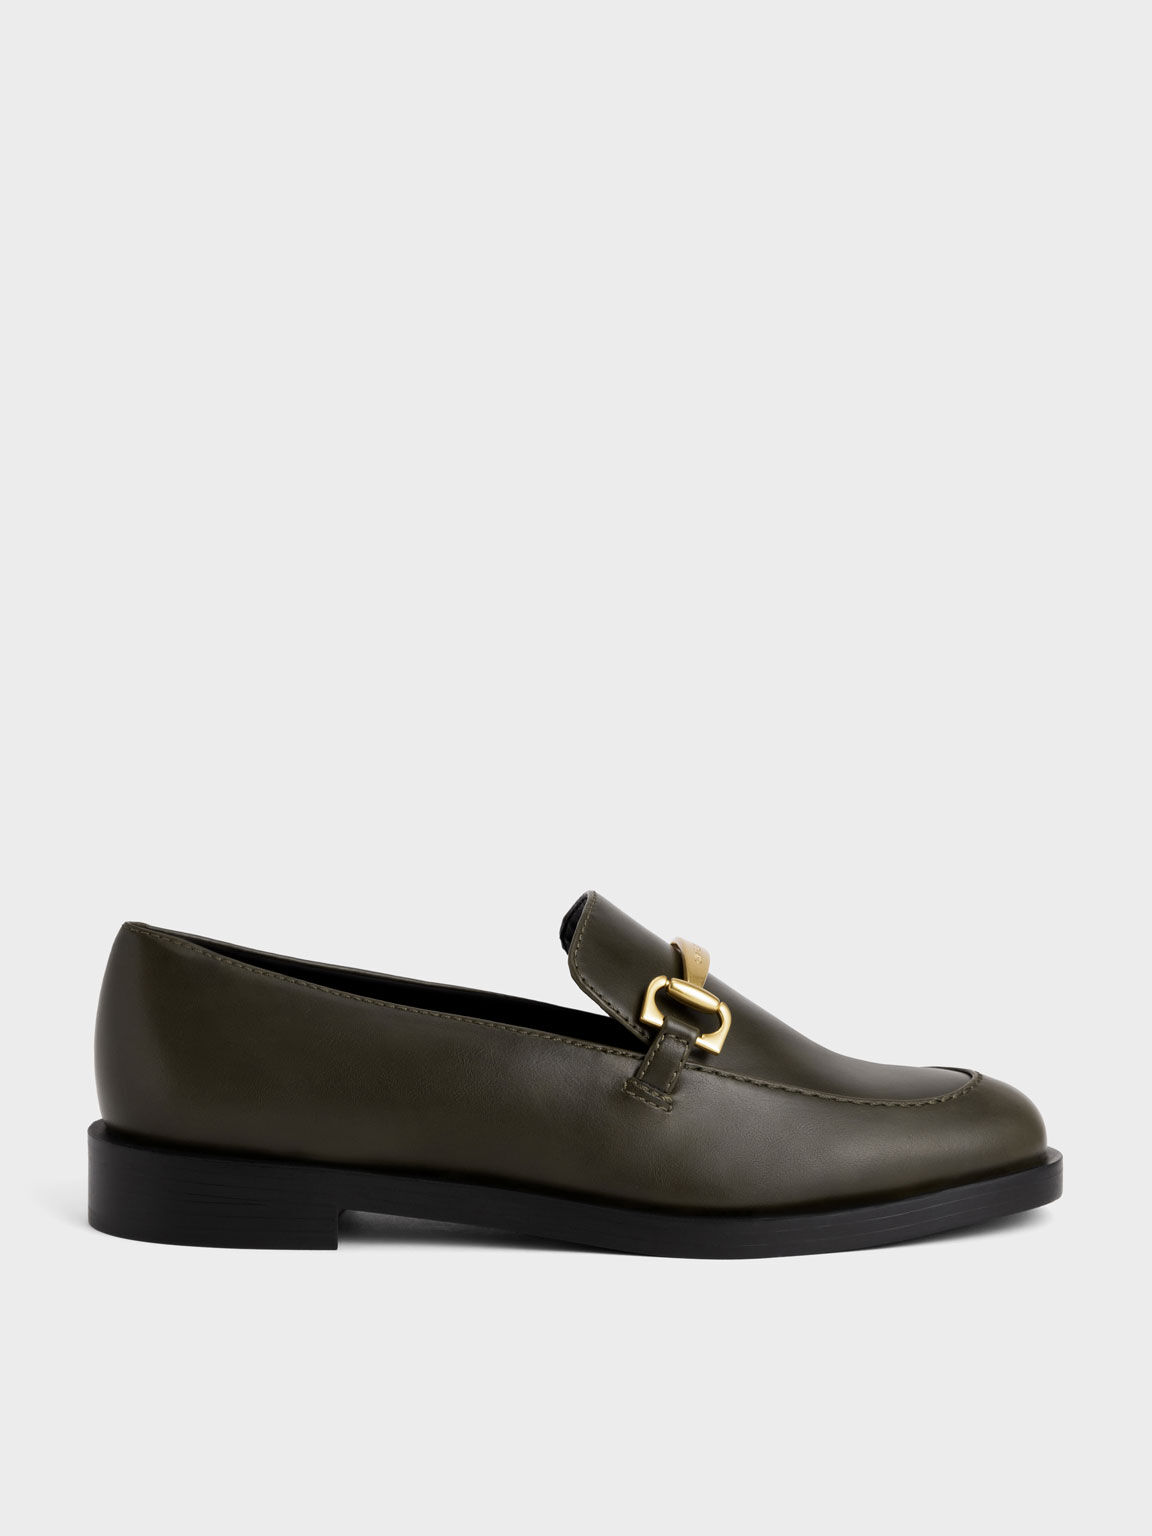 Metallic Accent Loafers, Olive, hi-res